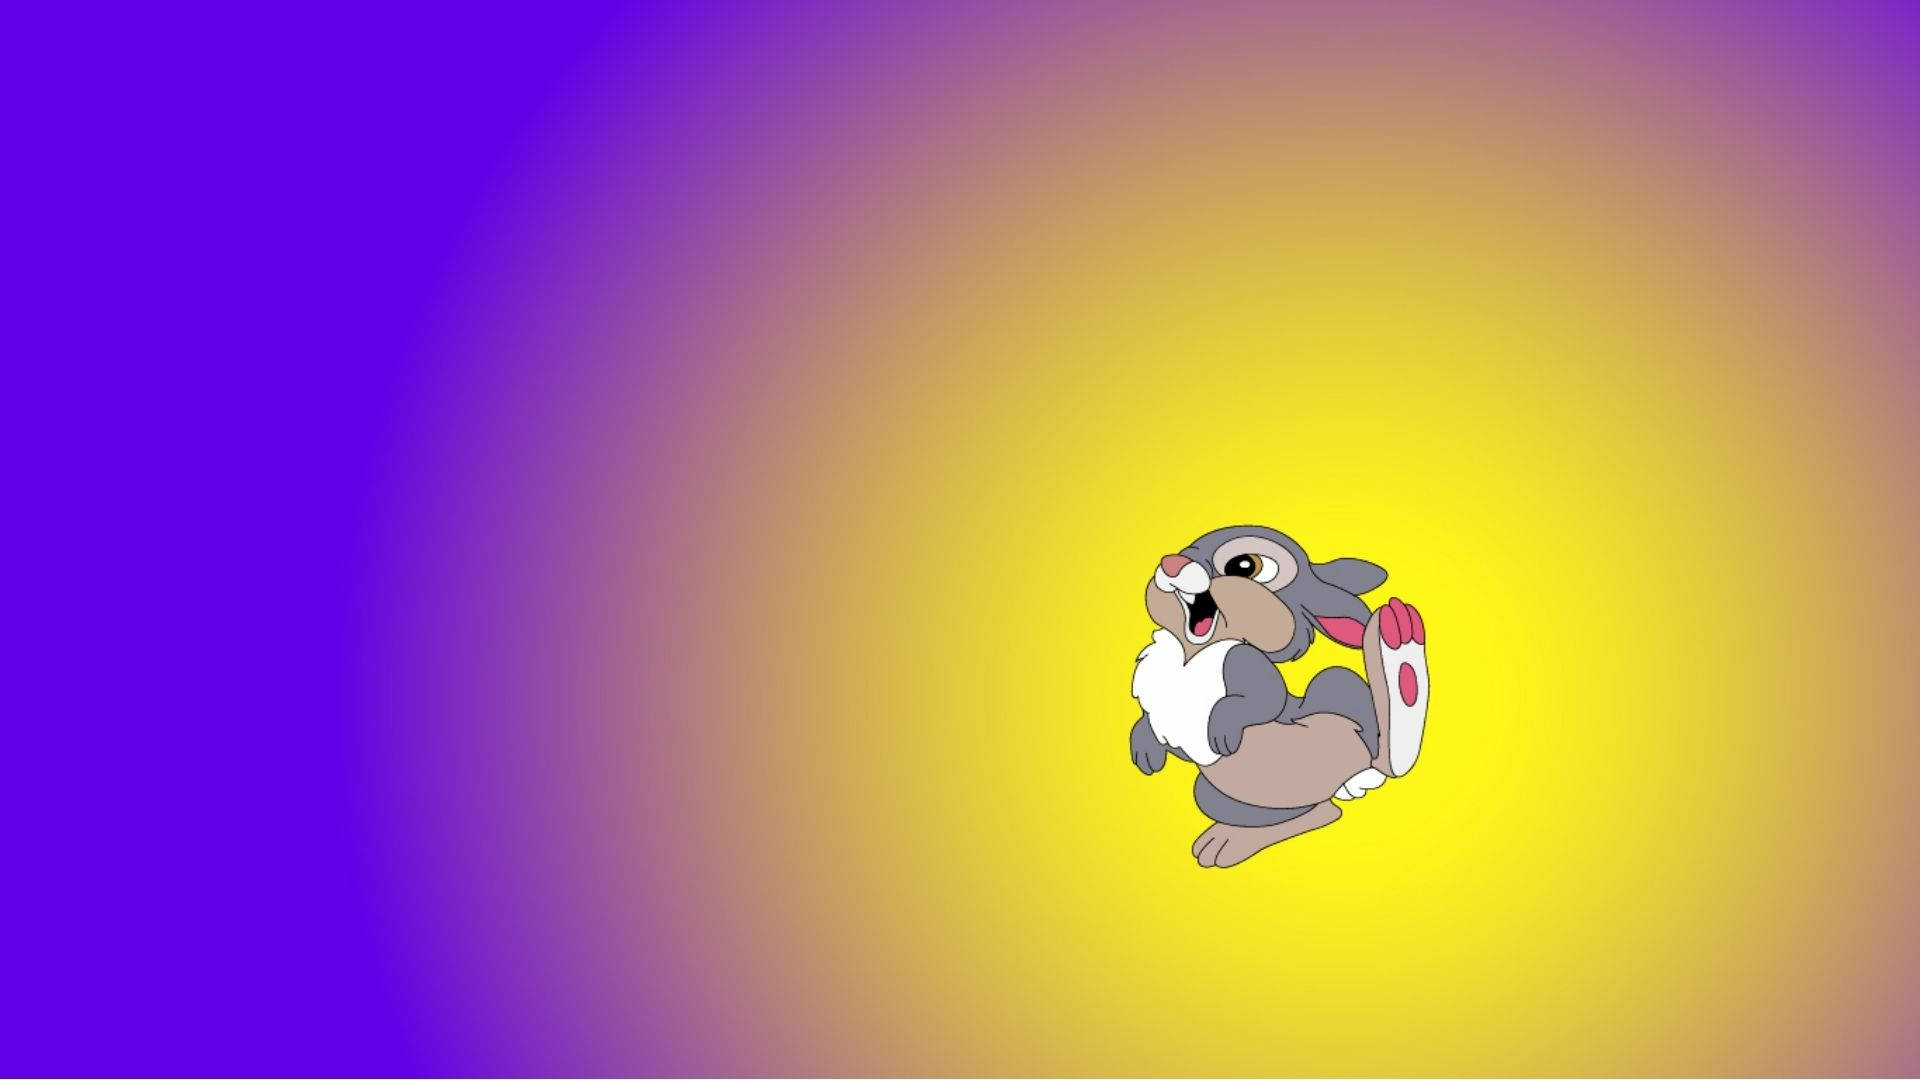 Stomping Thumper Background